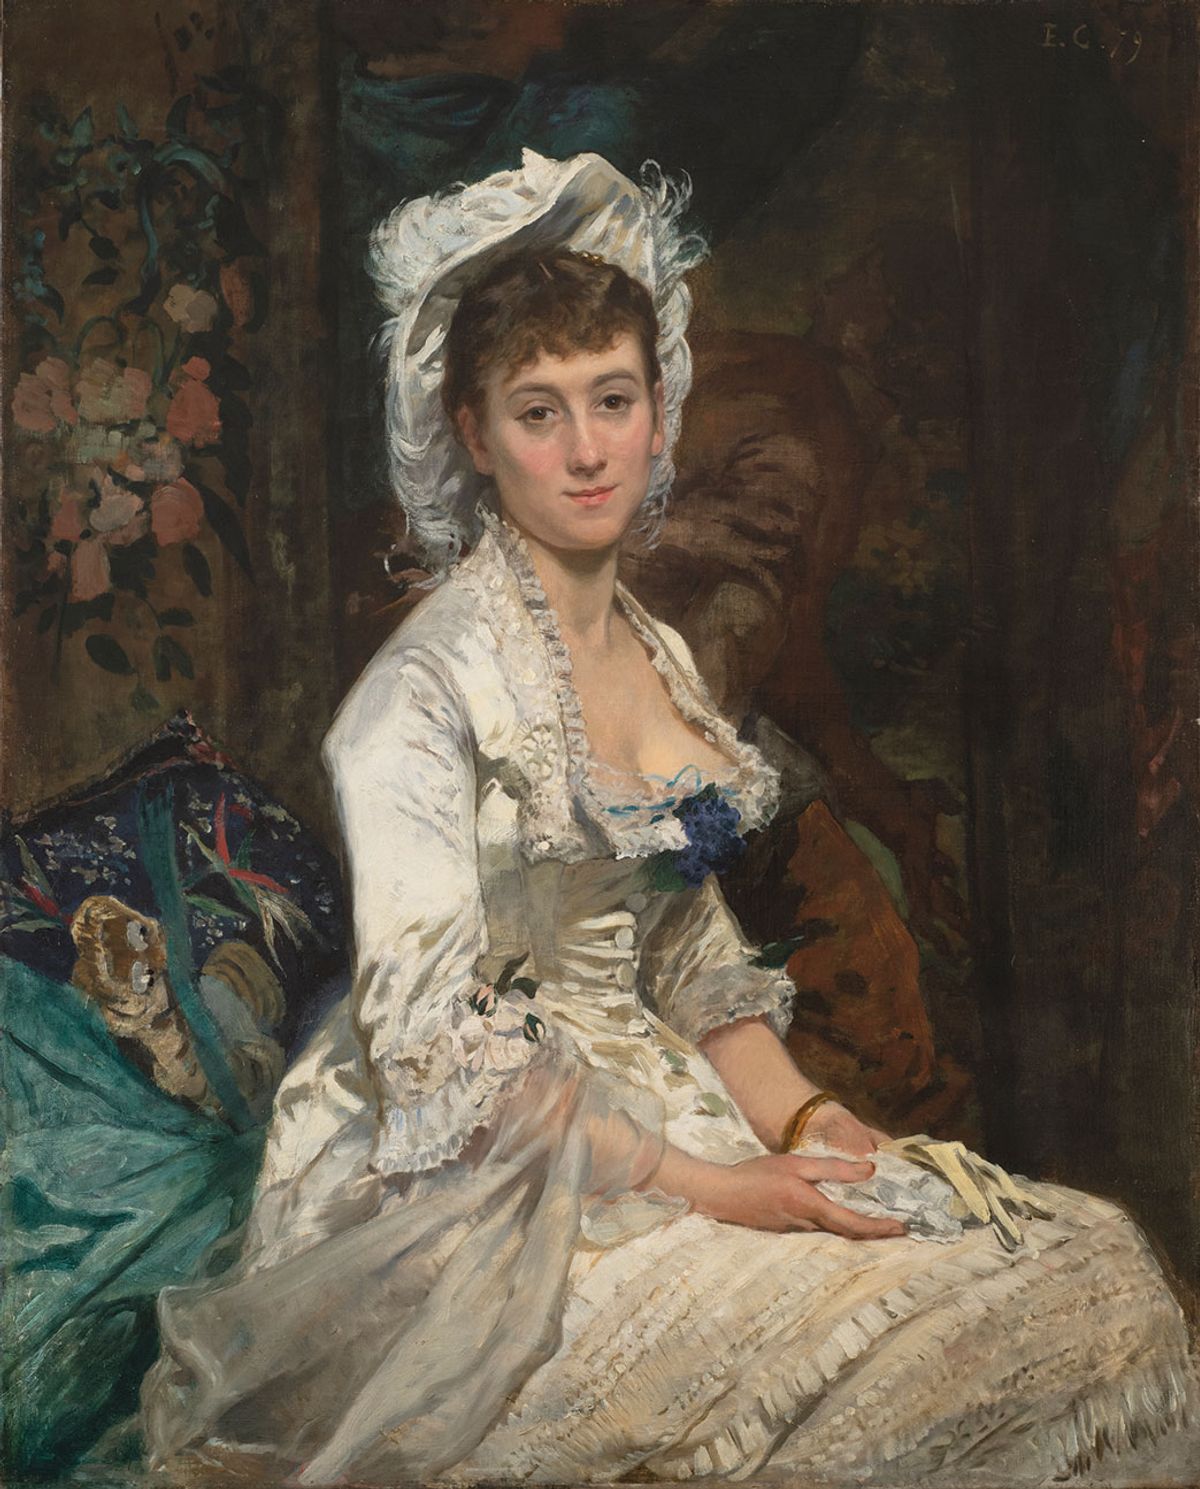 Eva Gonzalès, Portrait of a Woman in White (1879) is one of the works donated to the National Museum of Women in the Arts Photo: Lee Stalsworth